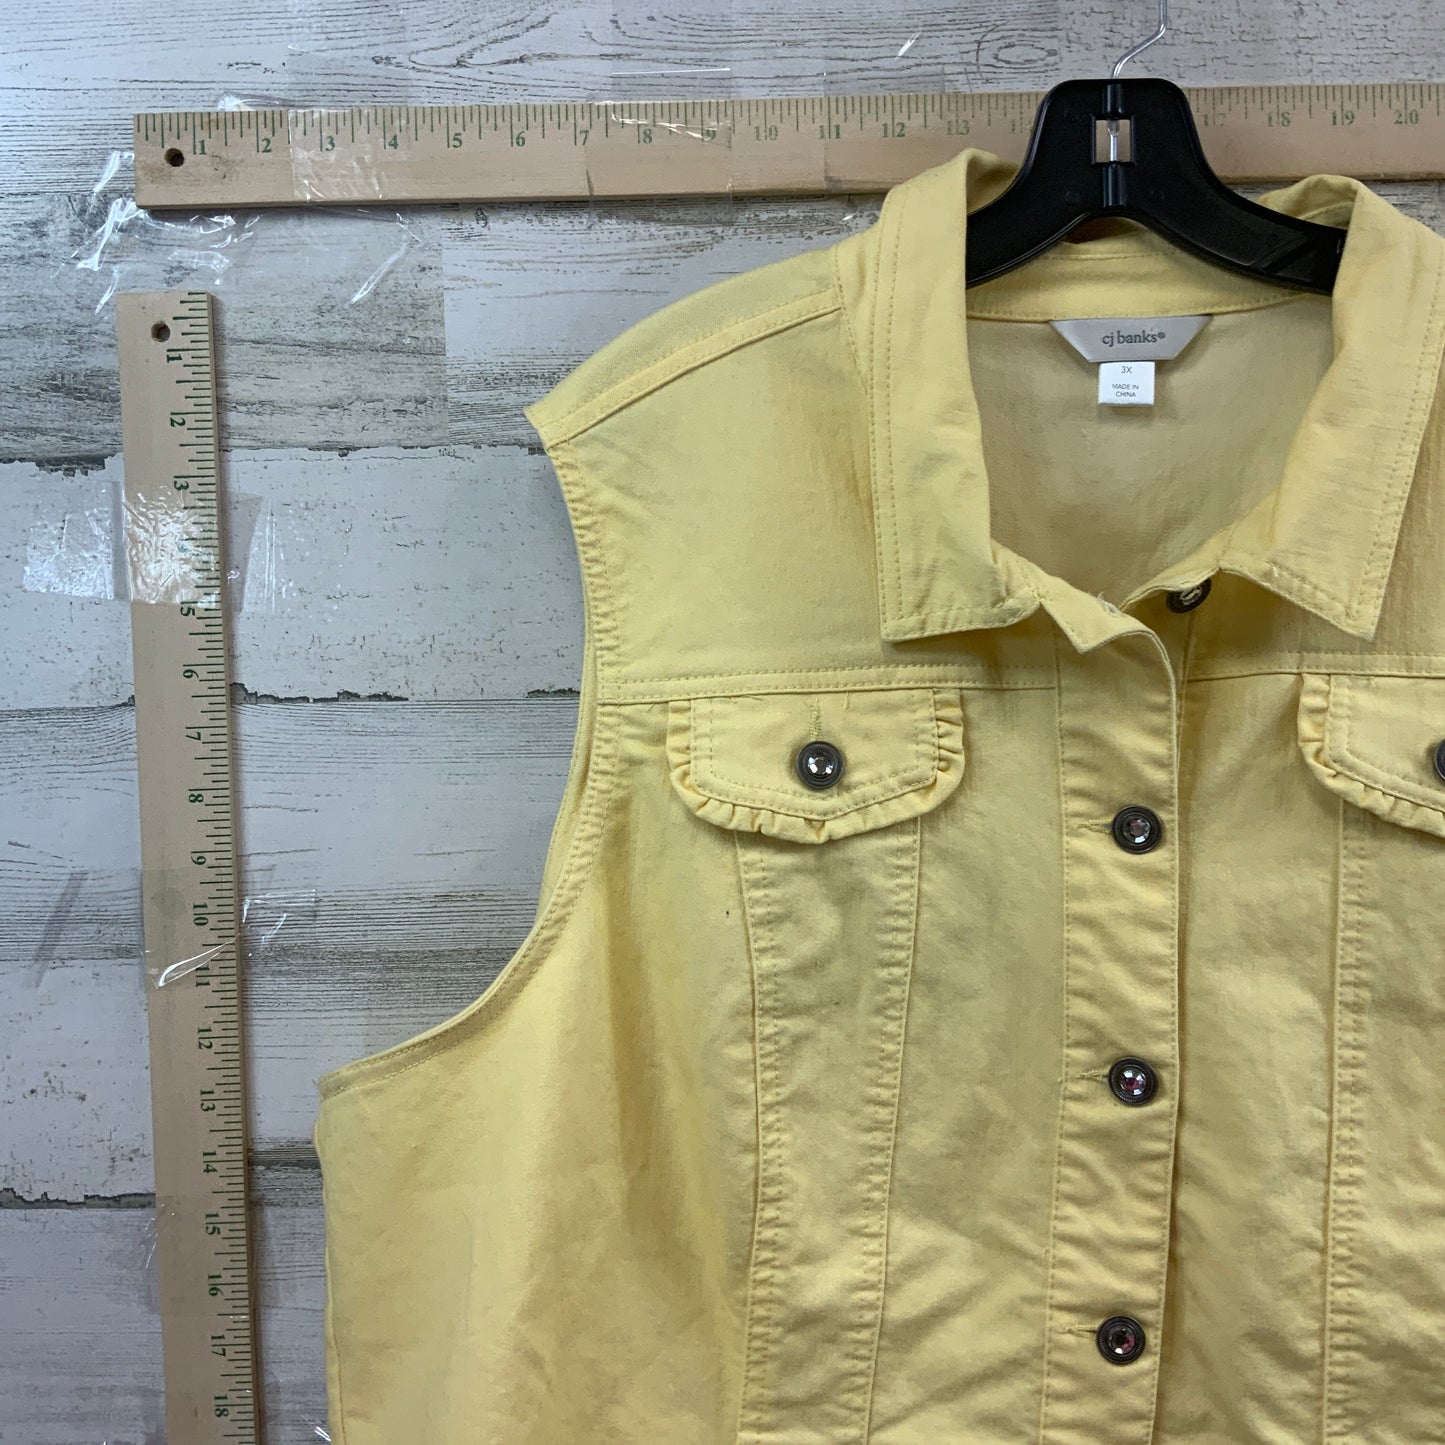 Yellow Vest Other Cj Banks, Size 3x